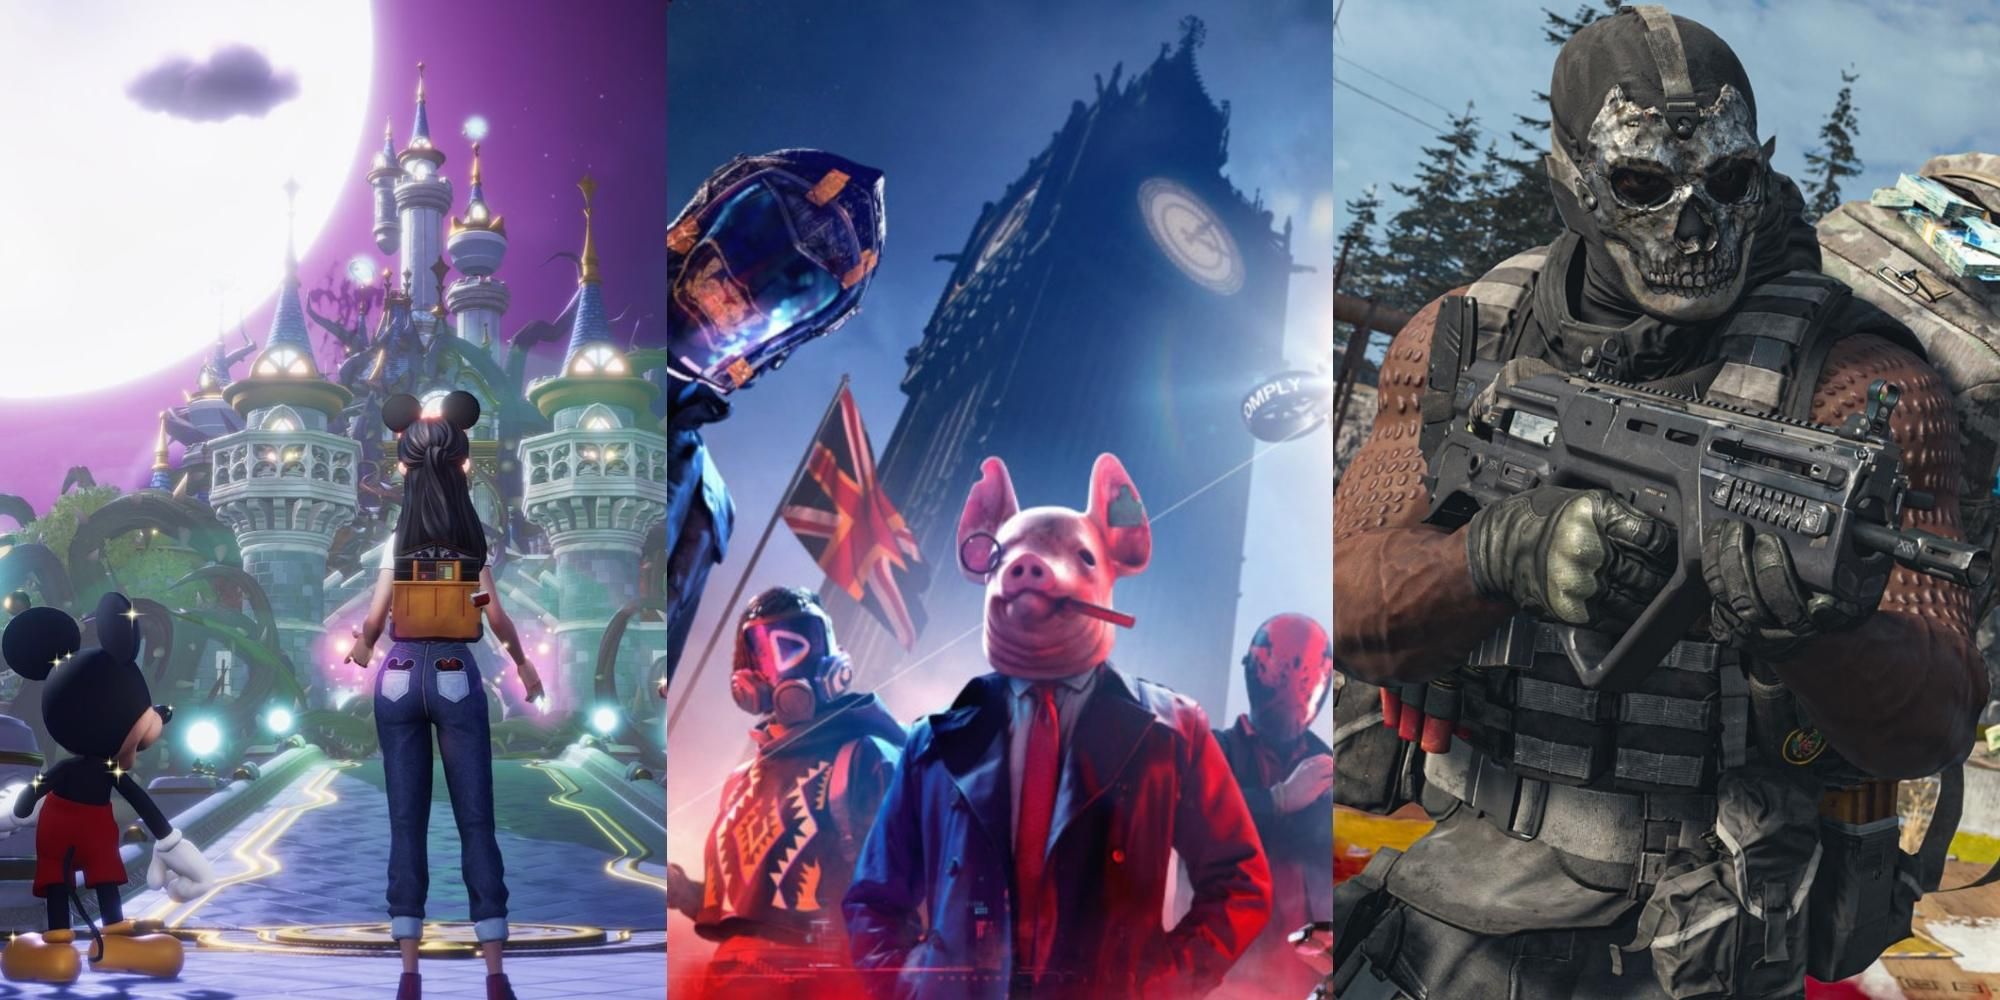 characters in Disney Dreamlight Valley, characters in Watch Dogs Legion, soldier in Call of Duty Warzone